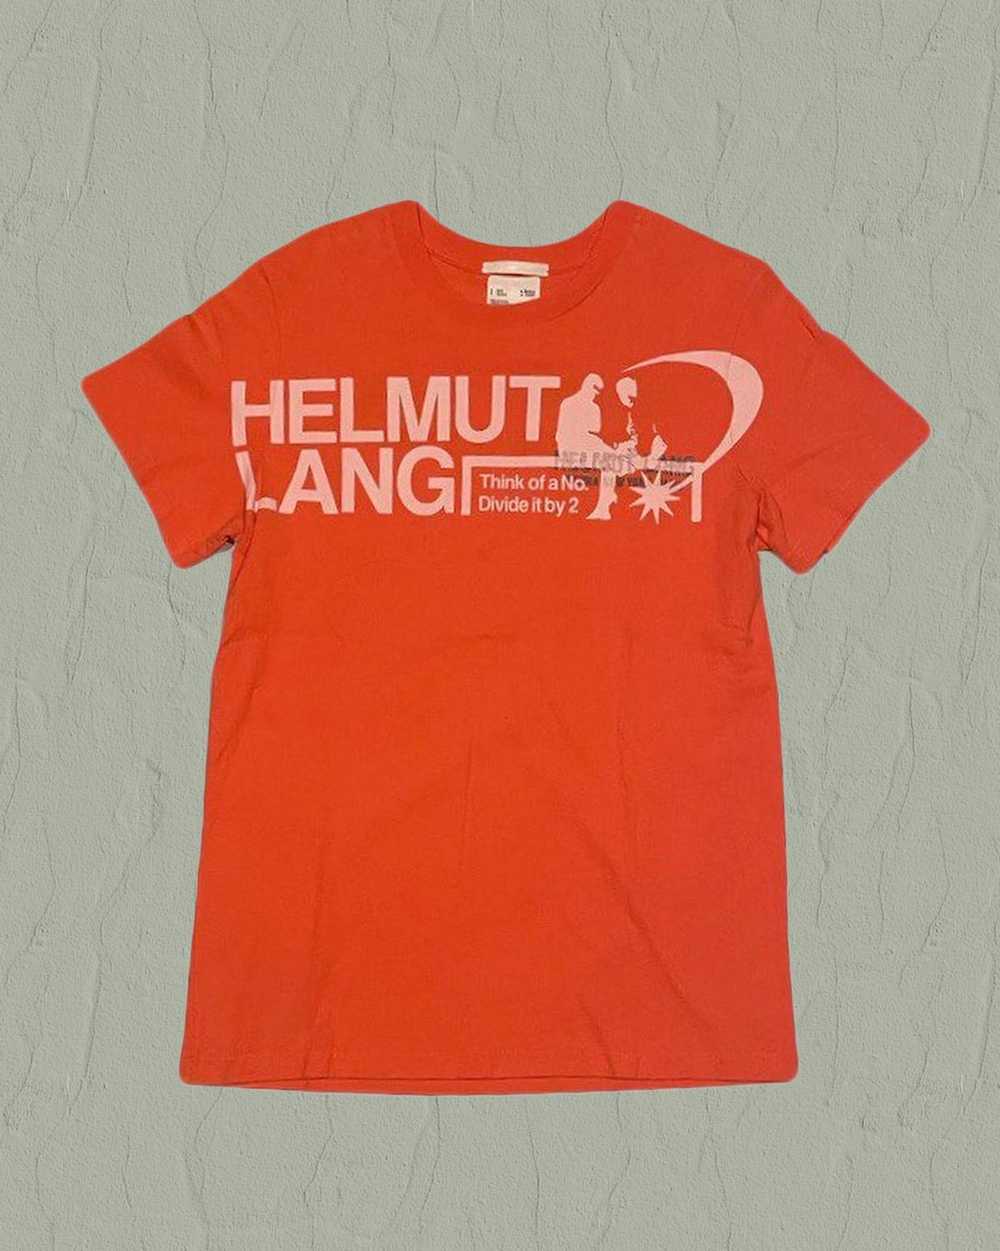 Helmut Lang Think of a No. Divide it by 2 Tee - image 1